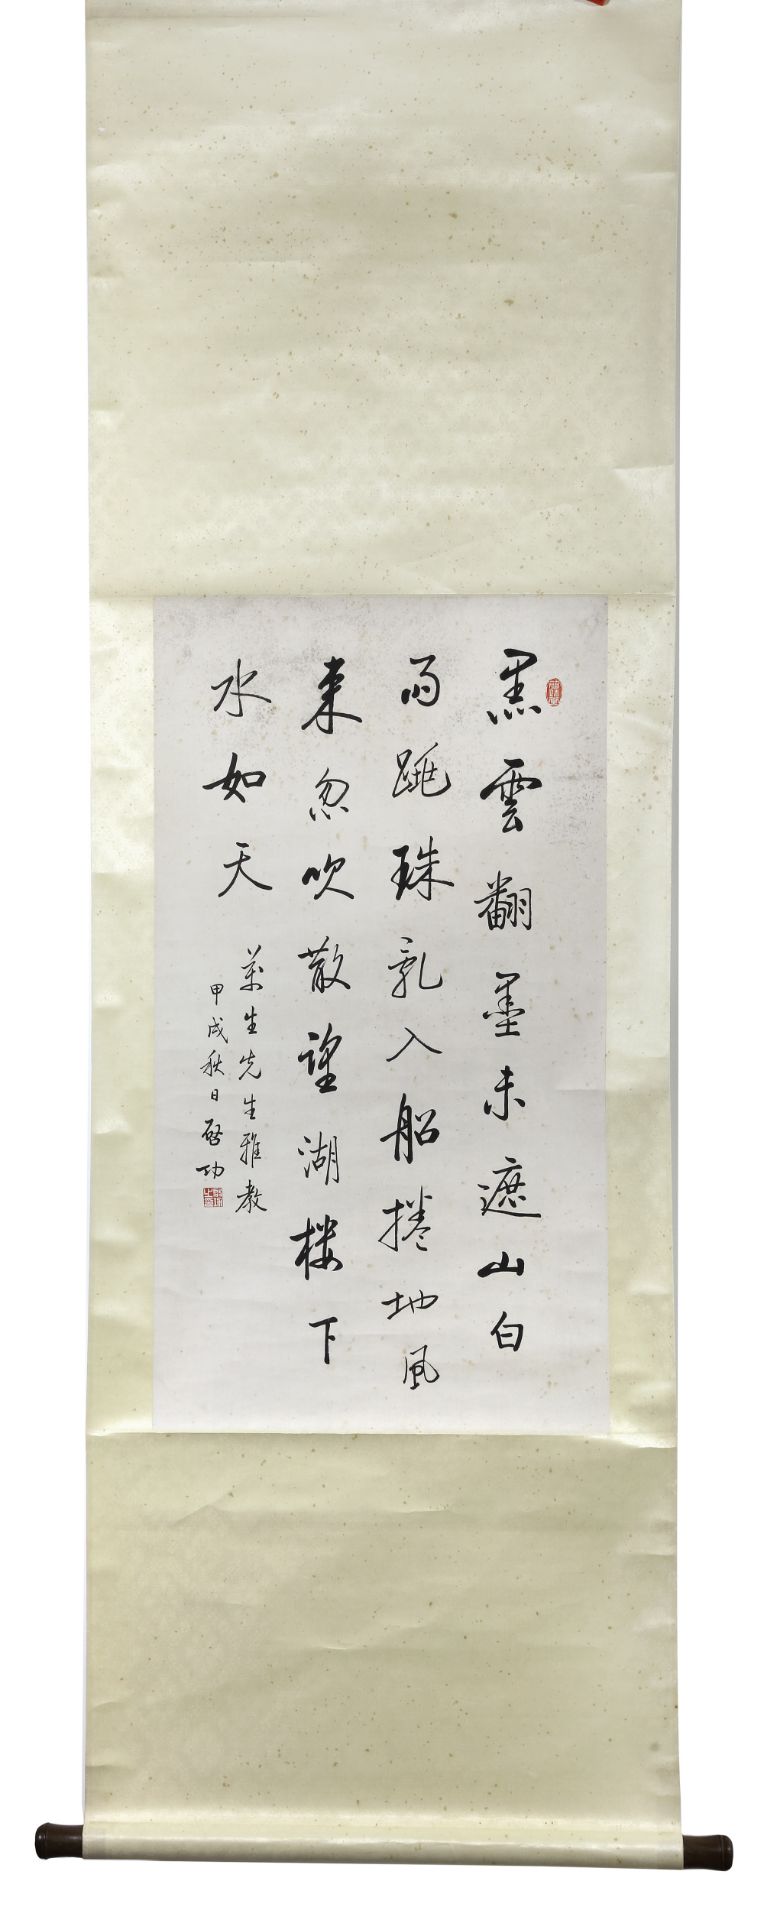 A CHINESE CALLIGRAPHIC SCROLL, QI GONG (1912-2005) - Image 2 of 2